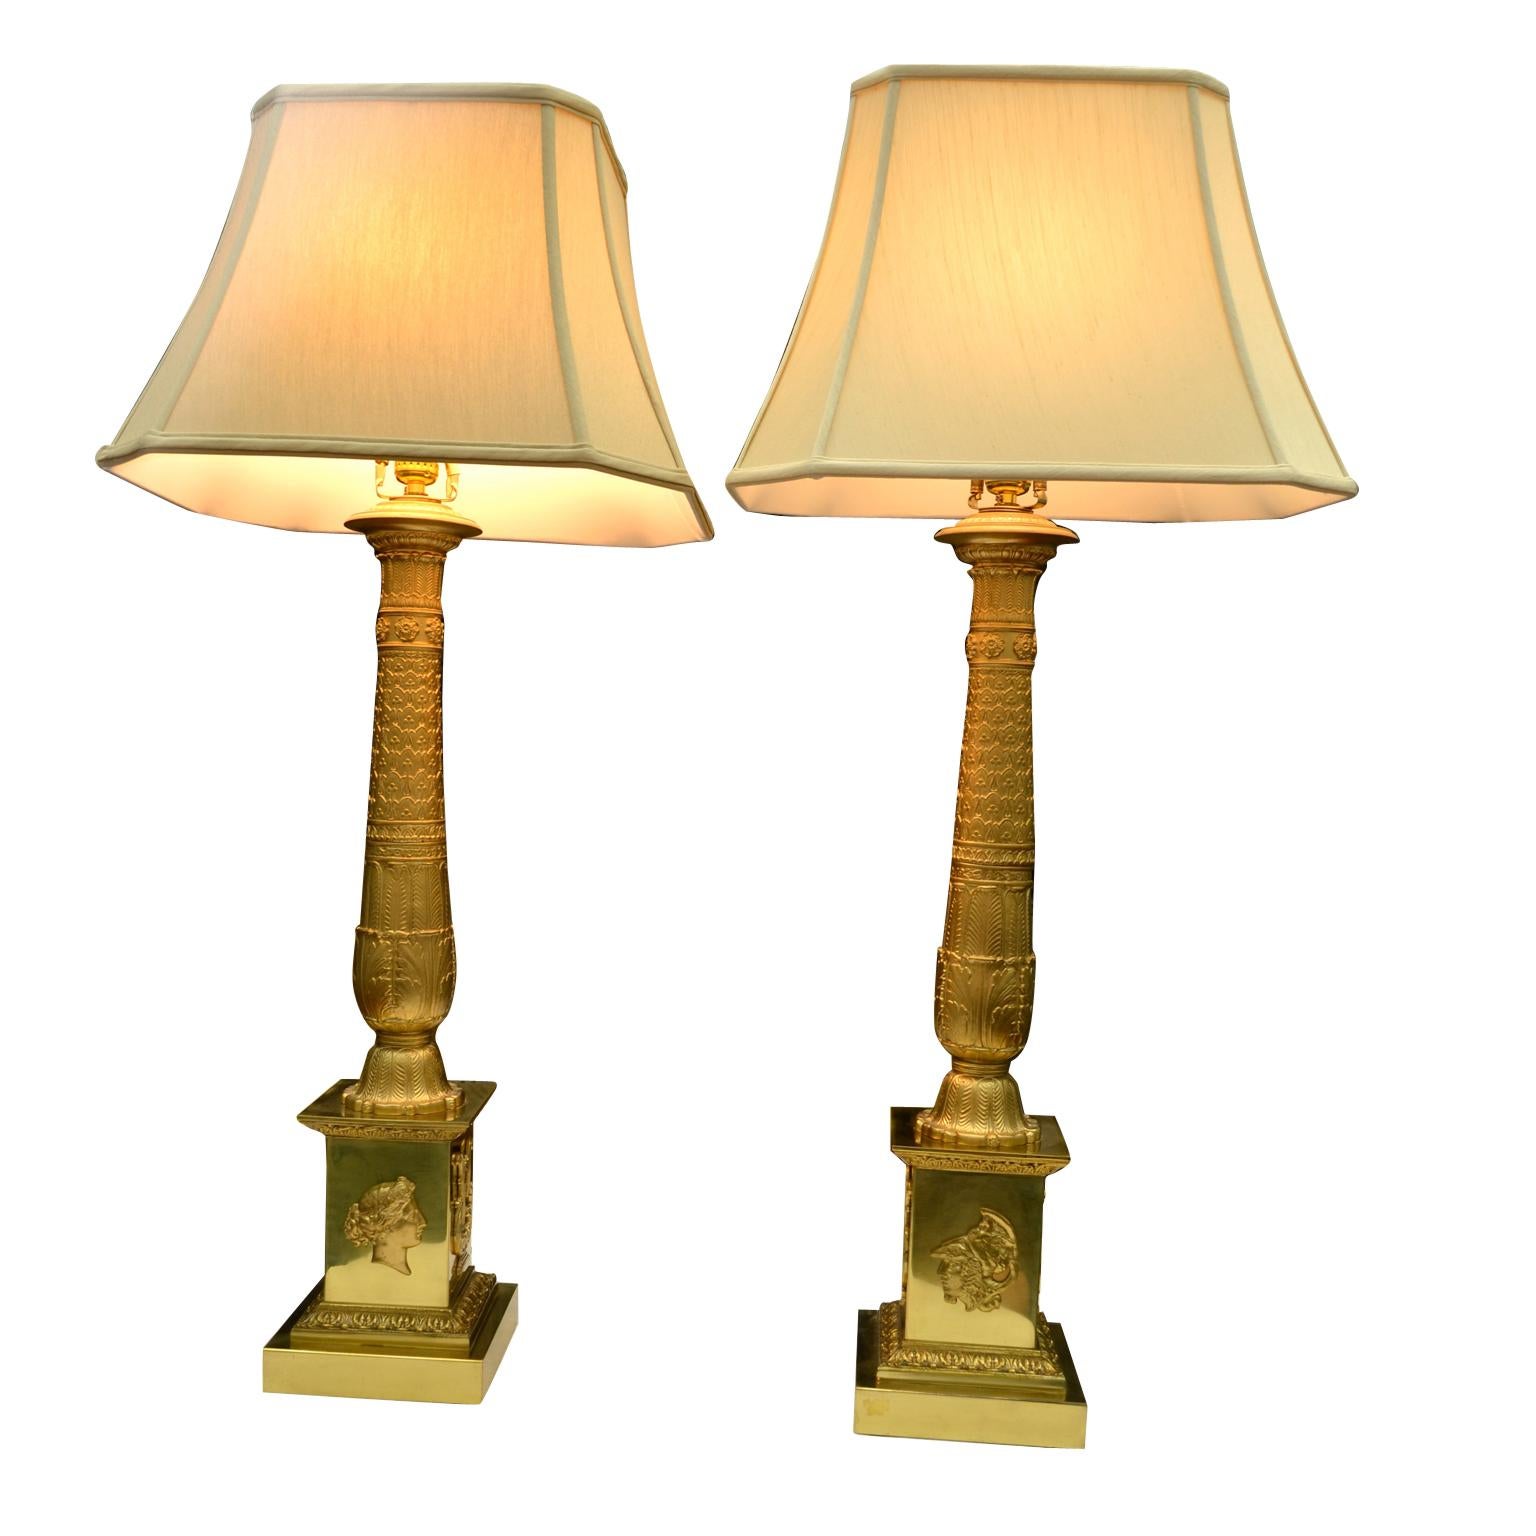 A pair of classical French Empire style gilded metal lamps (possibly earlier candelabra). The cast and decorated central round column sits on a stepped rectangular base, three sides of which are decorated with a lyre and a classical Roman profile,